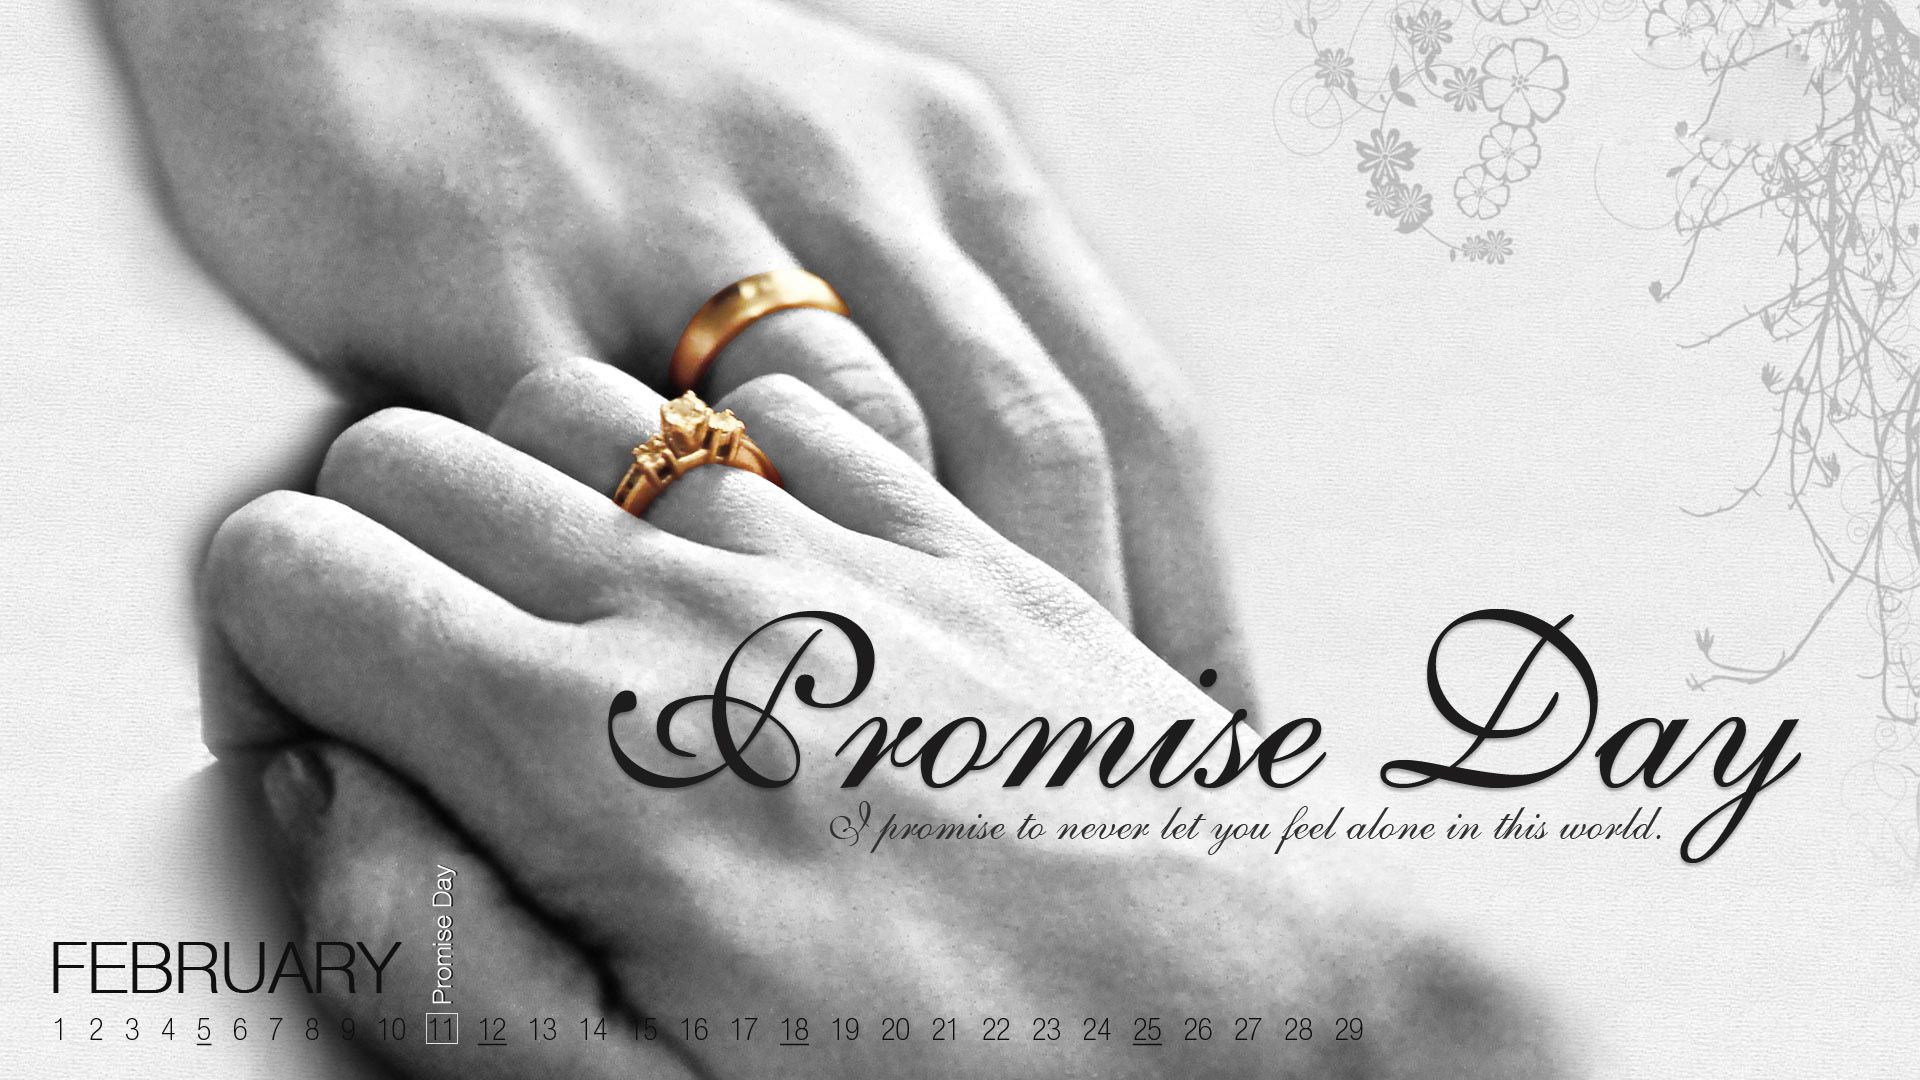 Download, Send, Promise Day Wishes, E-Greetings, Promise Day, Promise Day – 11 February, Happy Promise Day, Promise Day 2015, Wallpapers